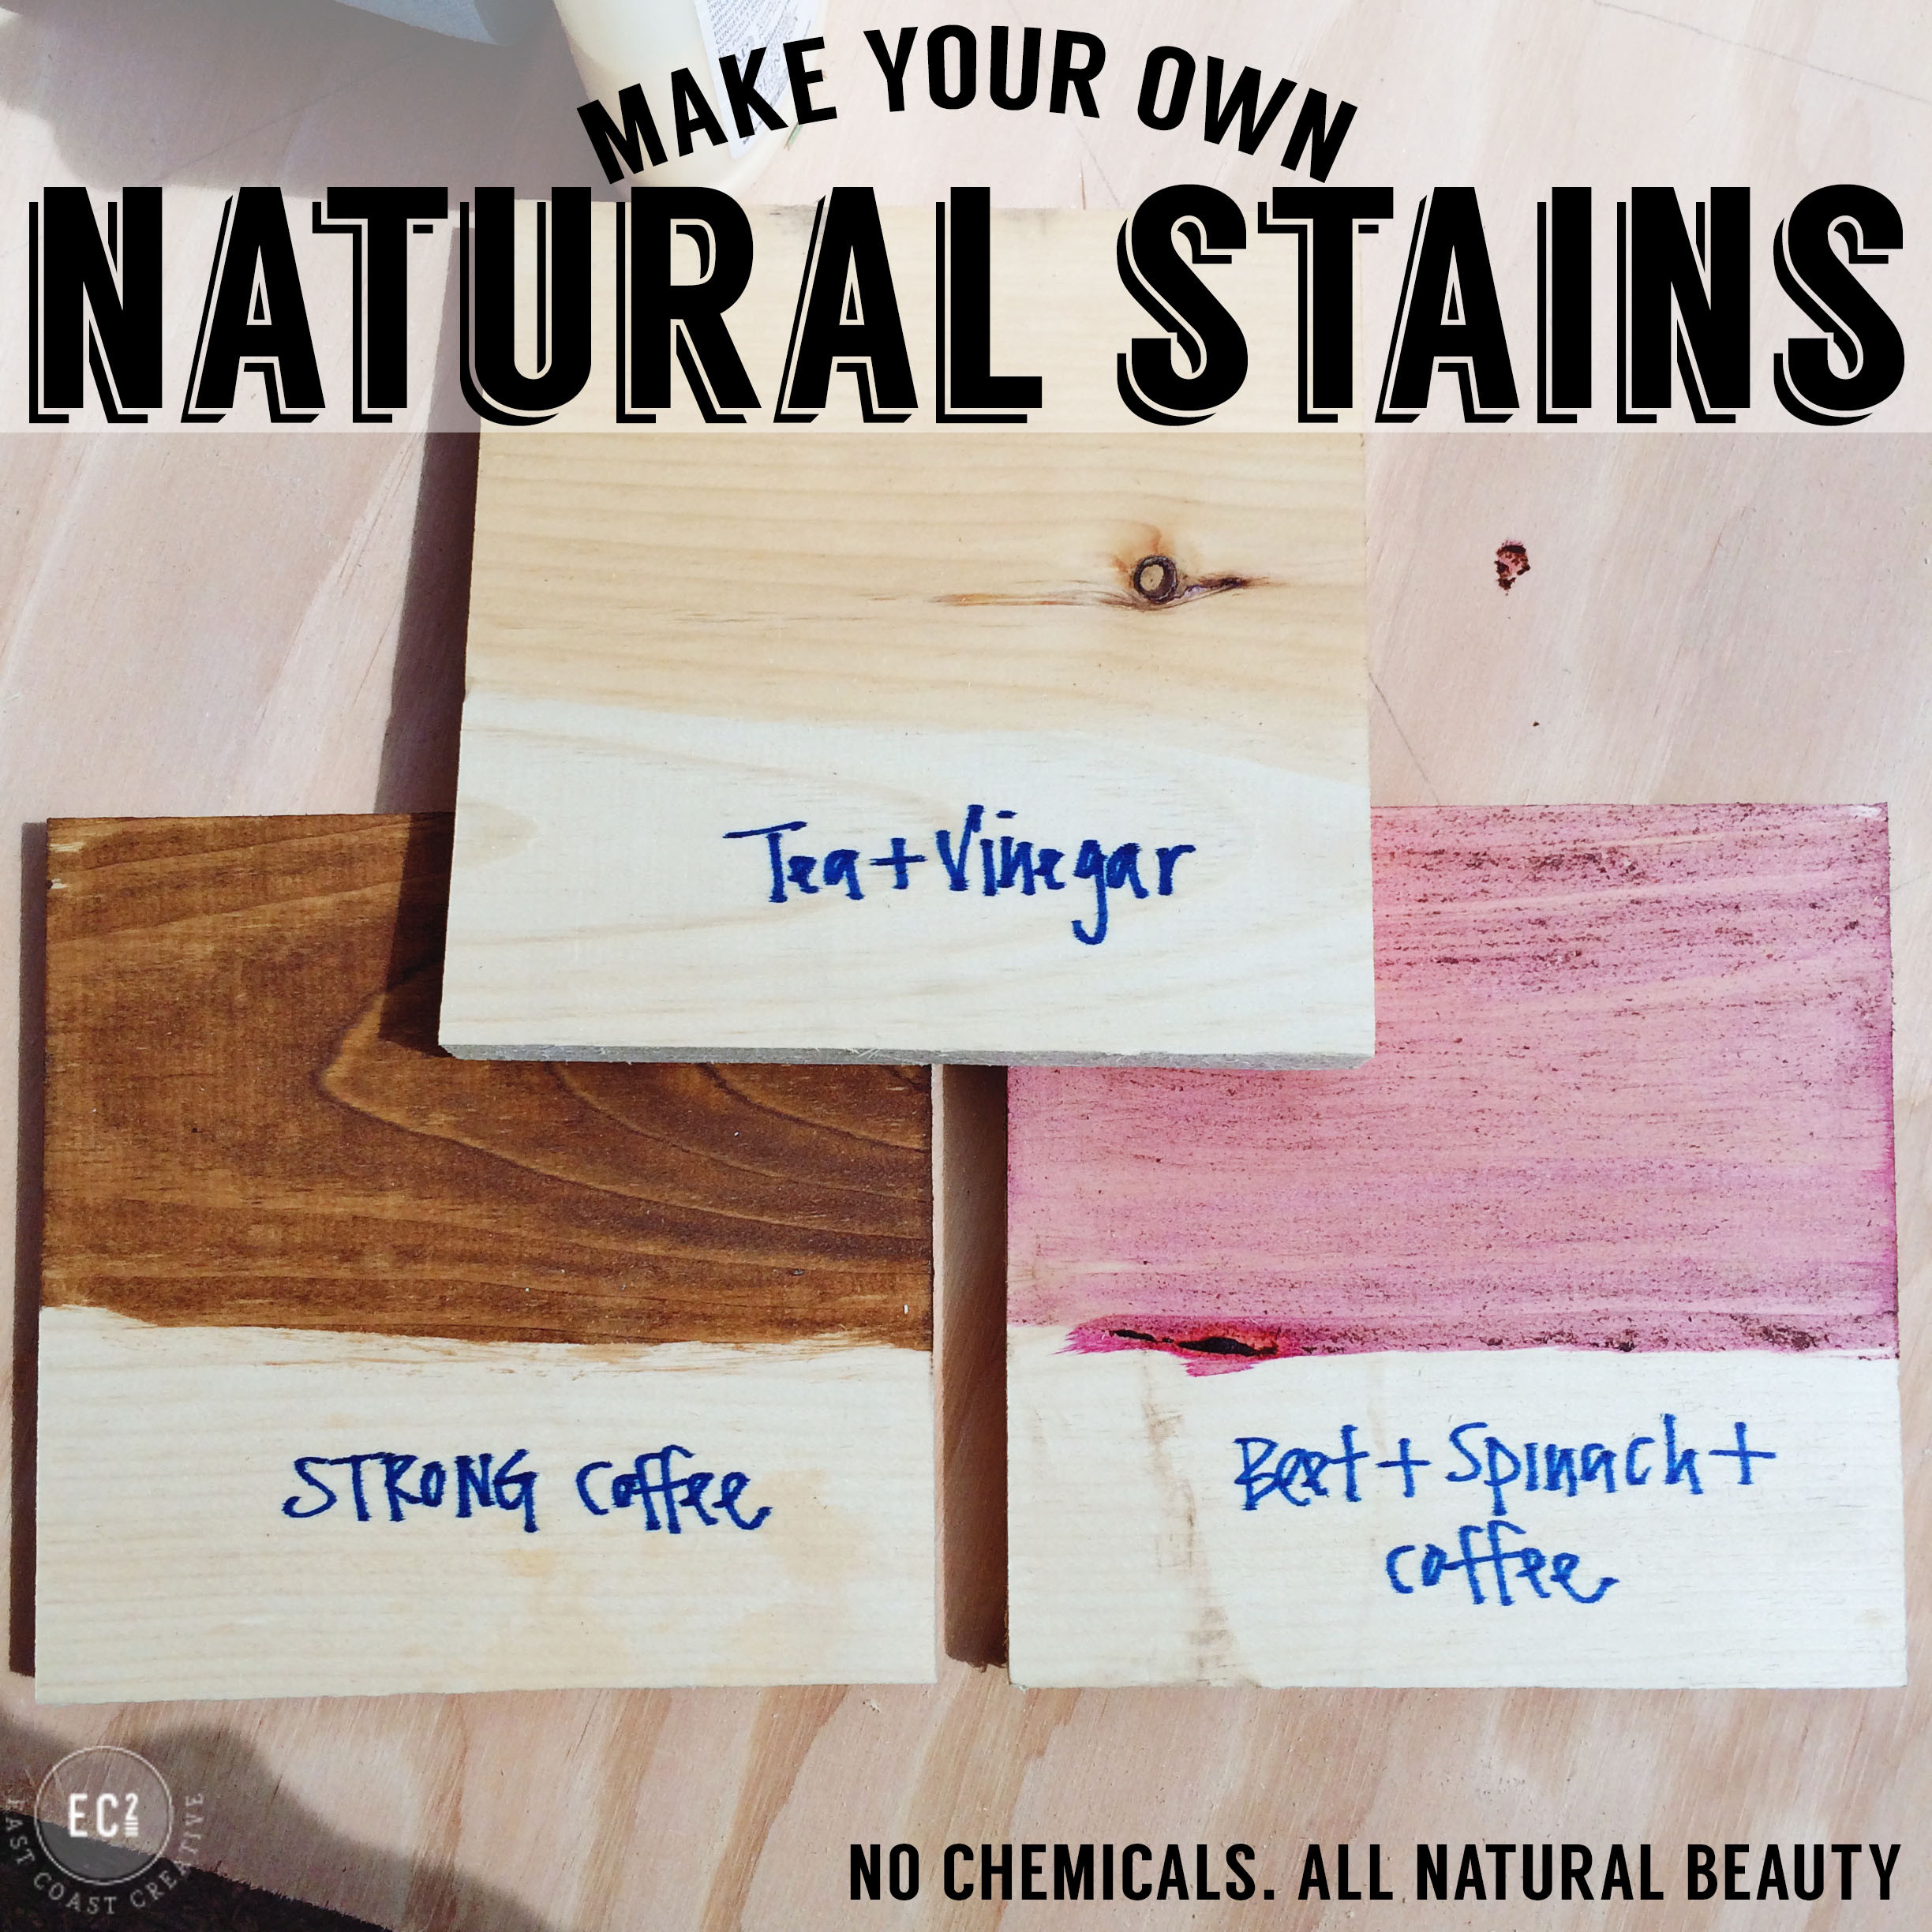 DIY Natural Wood Stain
 Scrap Wood Wall Art & How to Make Your Own Natural Wood Stains